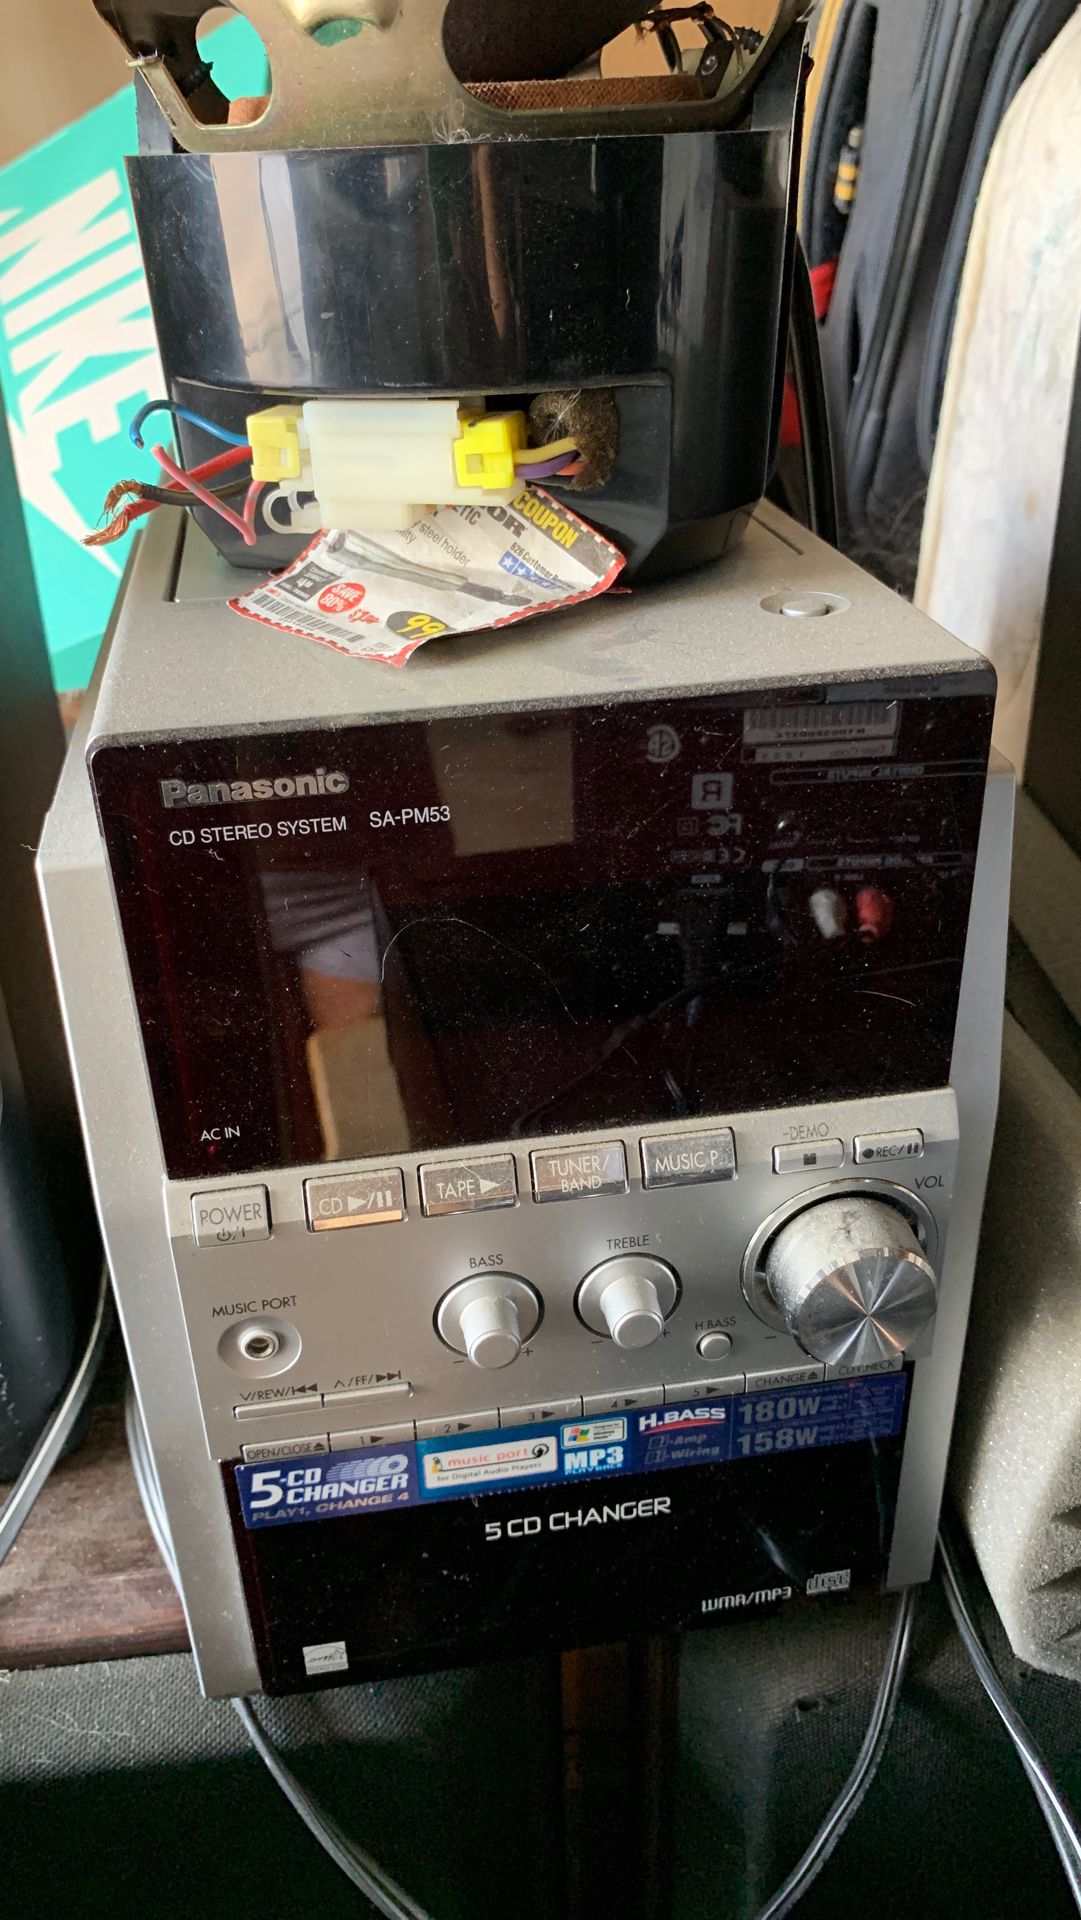 Panasonic cd stereo system with speakers